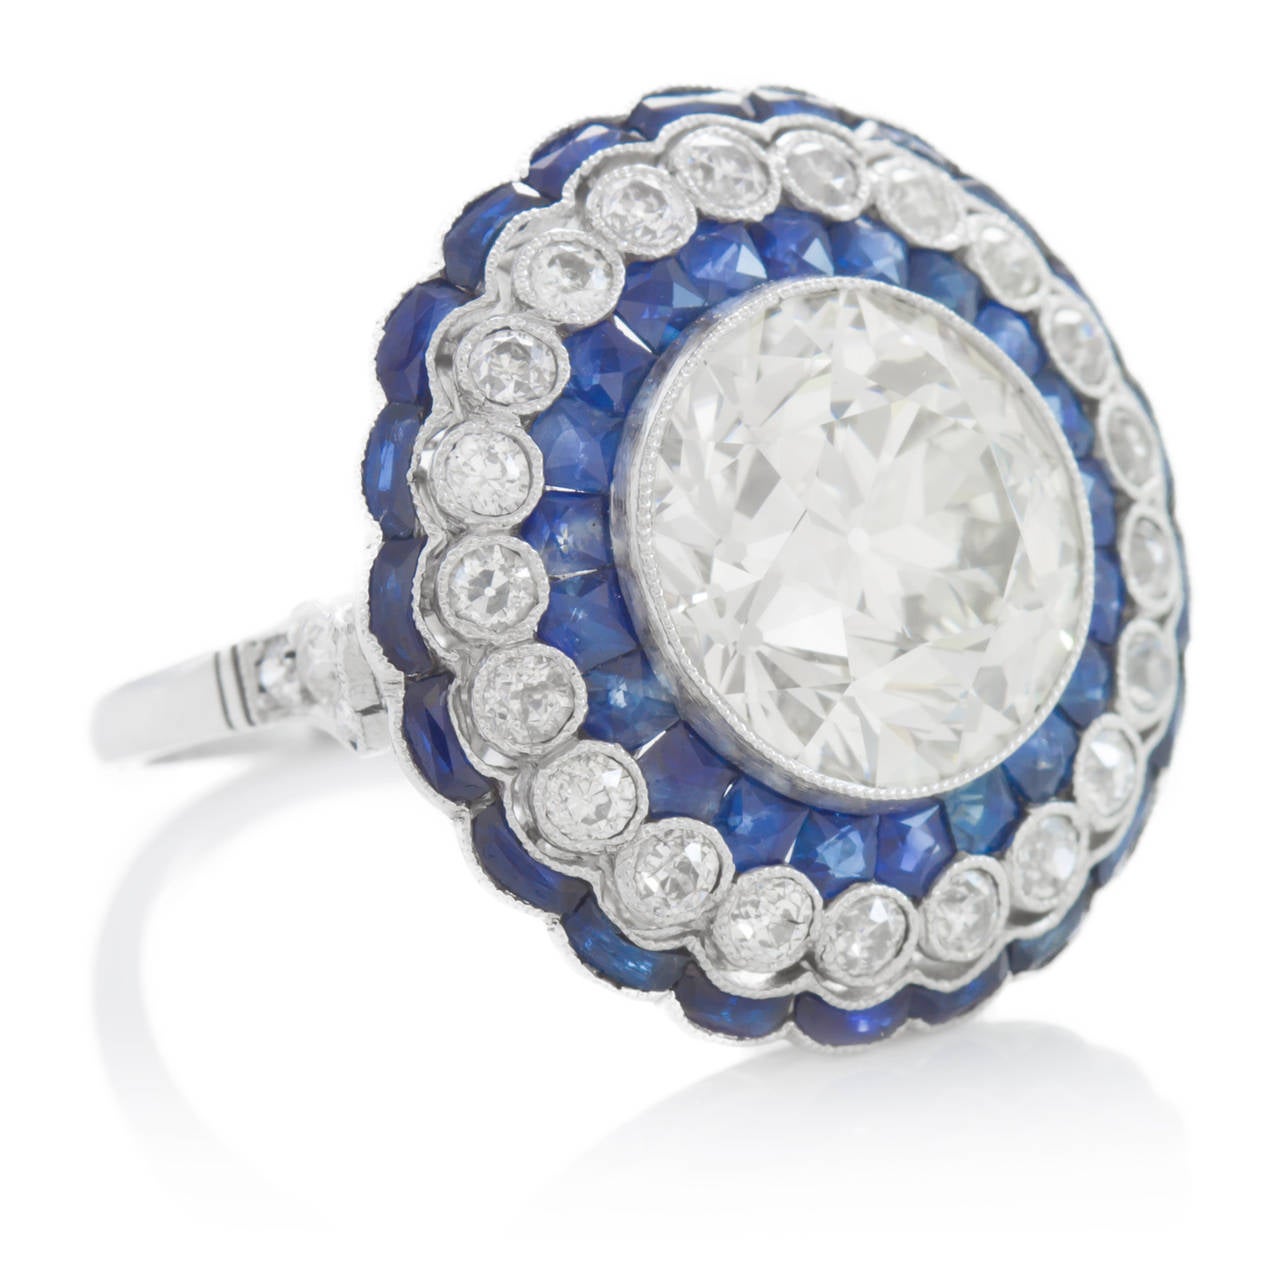 This ring is amazing. From the filigree to the milgrain, to the rose cut sapphires and perfectly chosen diamonds that complement the 5.12ct european cut diamond in the center, this ring has it all. Rings like this are what inspire the modern art